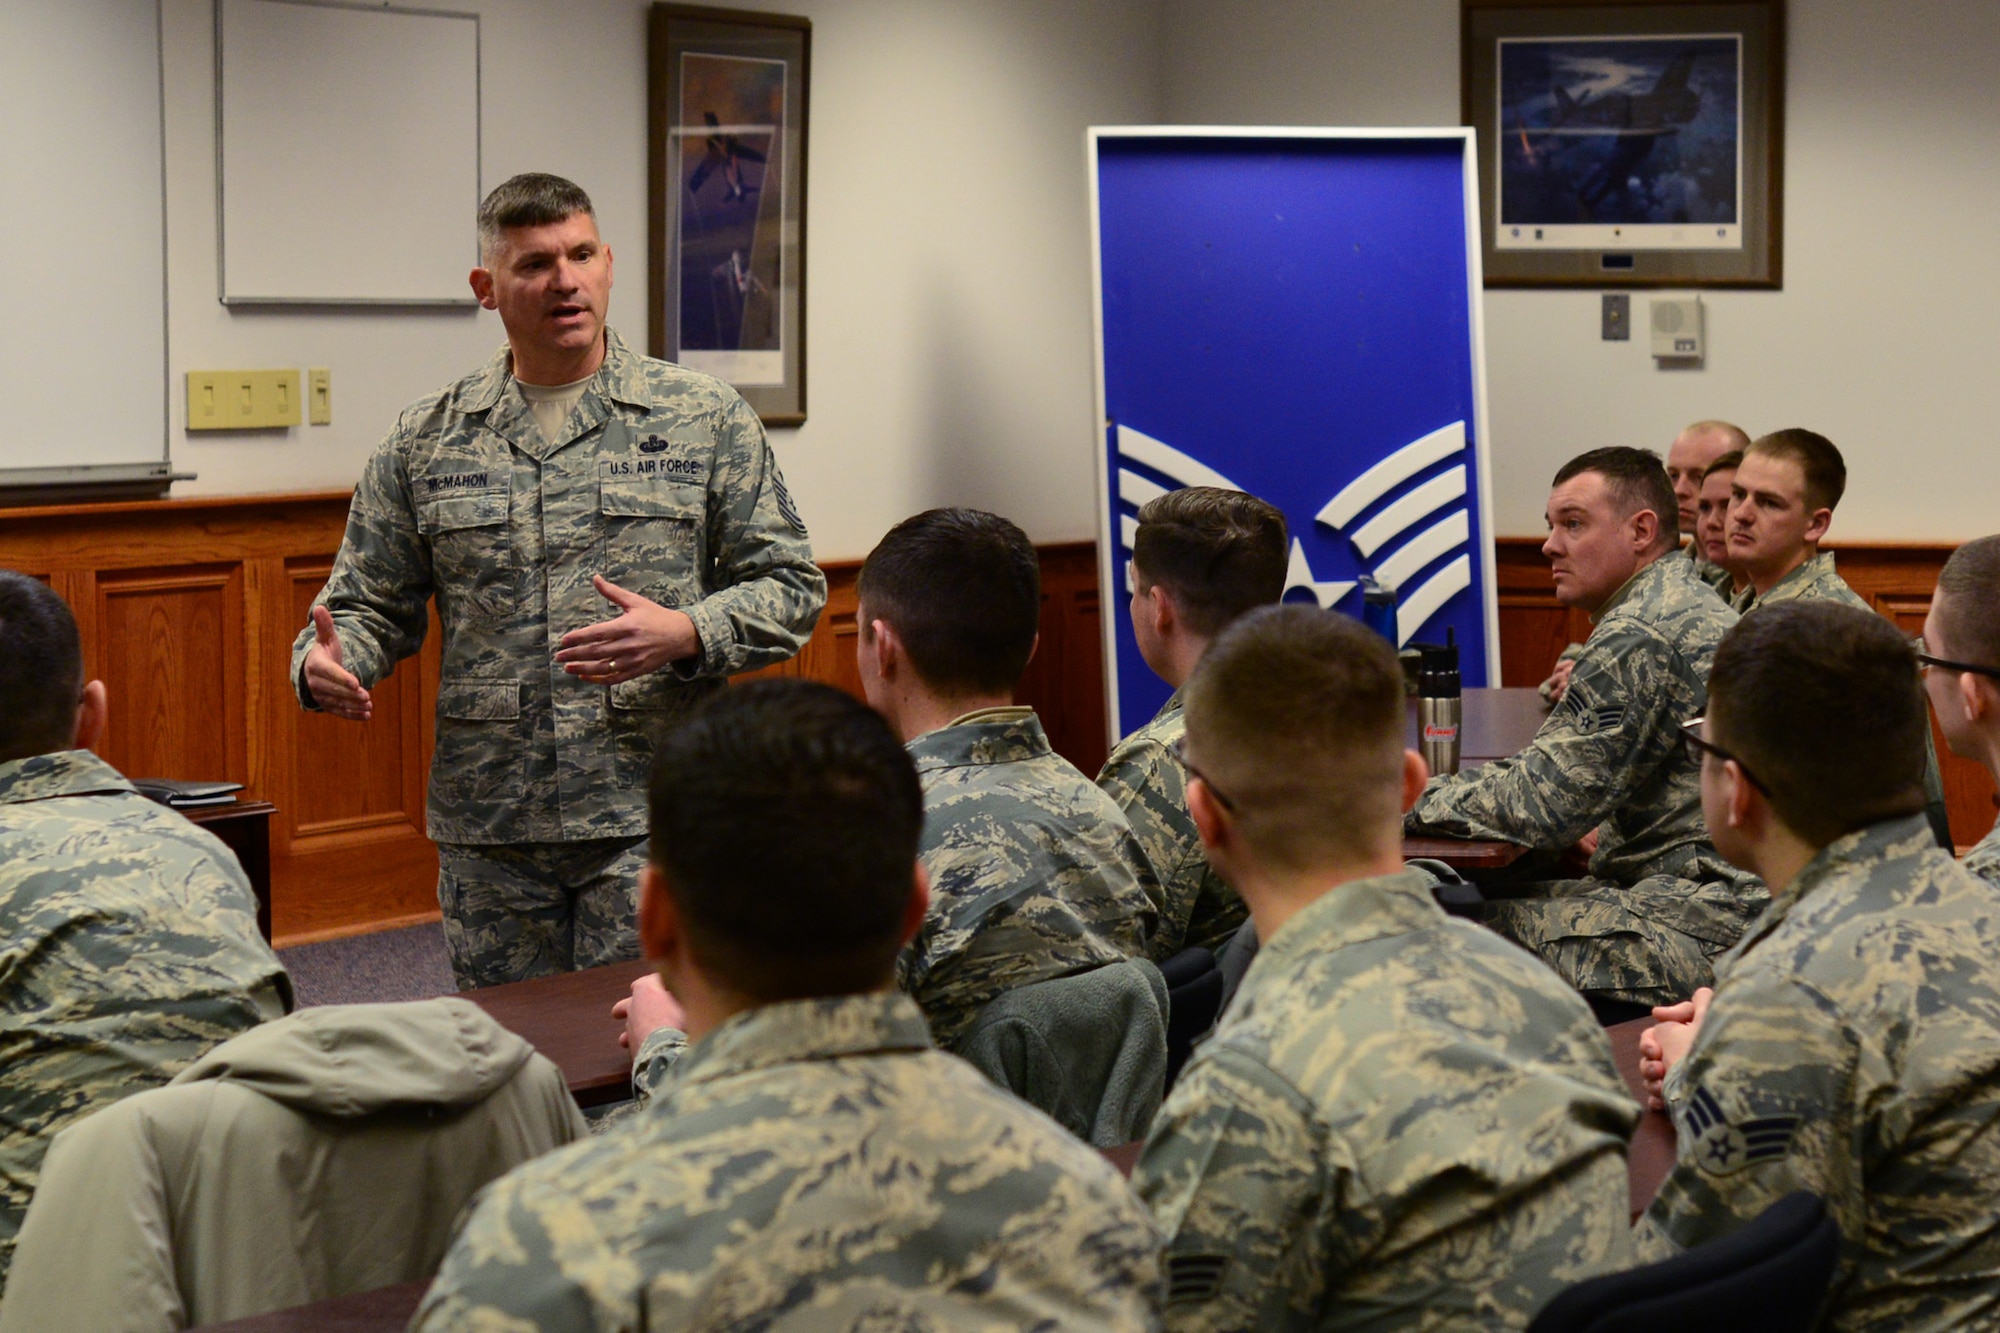 Chief Master Sgt. Patrick McMahon, senior enlisted leader of U.S. Strategic Command, delivers remarks to students at the Airman Leadership School Feb. 23, 2018, at Malmstrom Air Force Base, Mont.